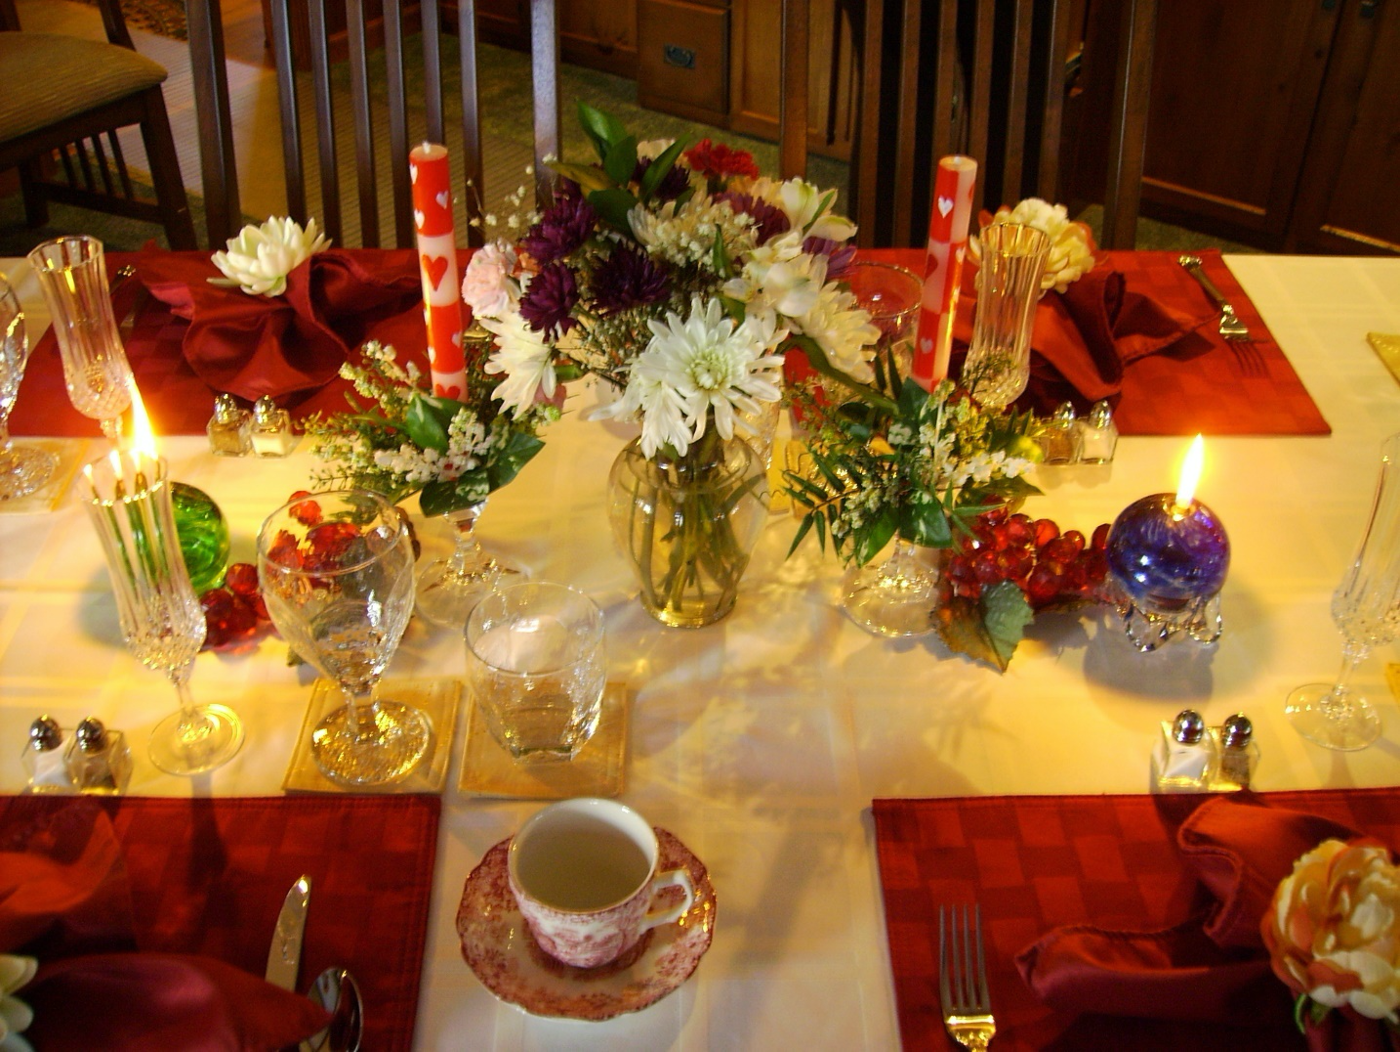 Valentines Table Setting for Breakfast